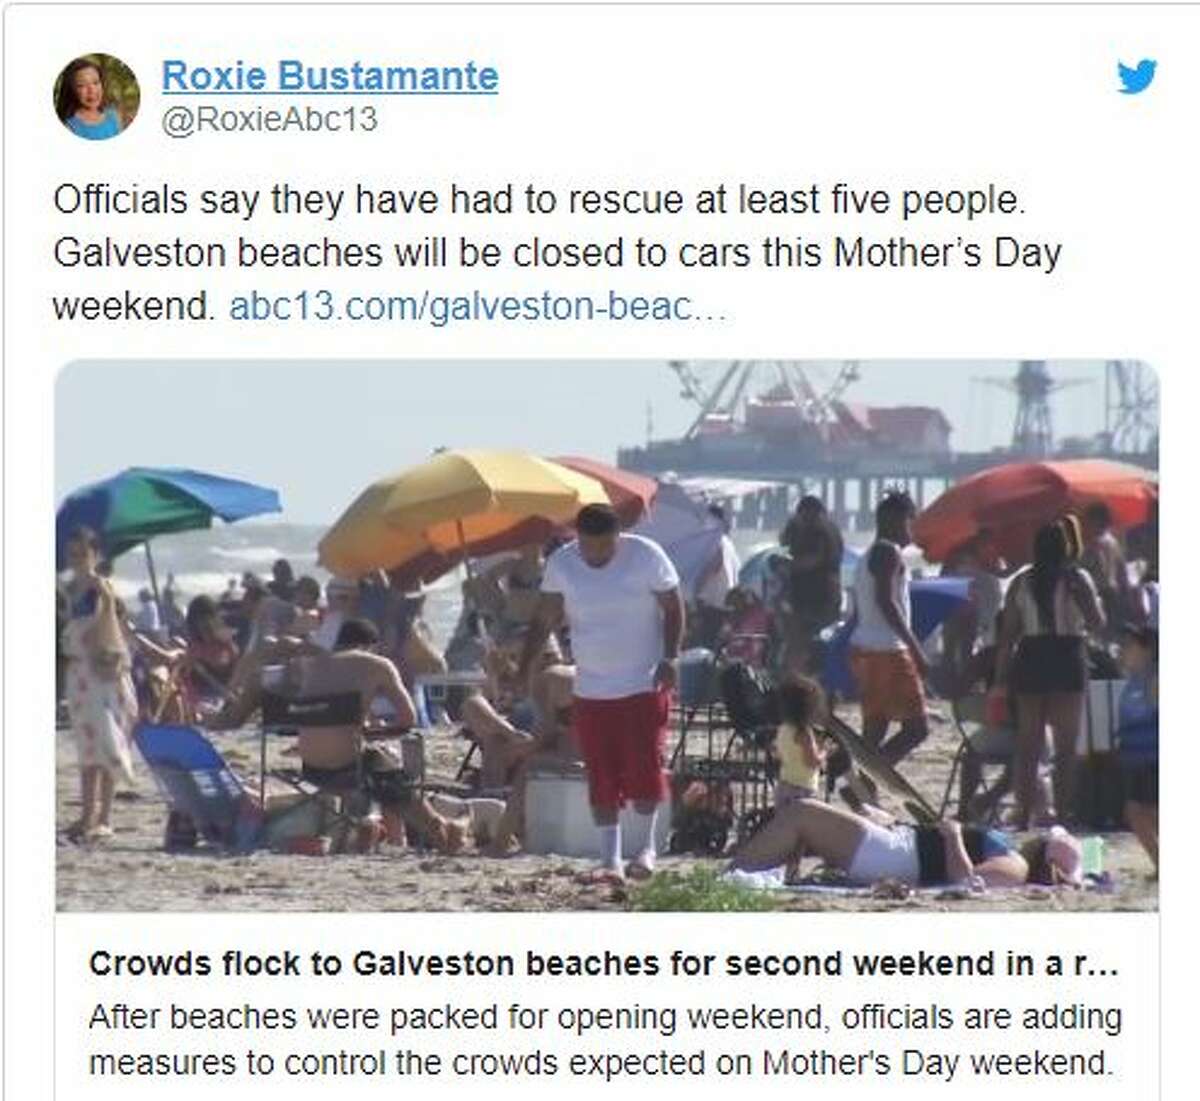 Crowds have flocked to Galveston beaches for a second weekend in a row, according to ABC-13's Roxie Bustamante.